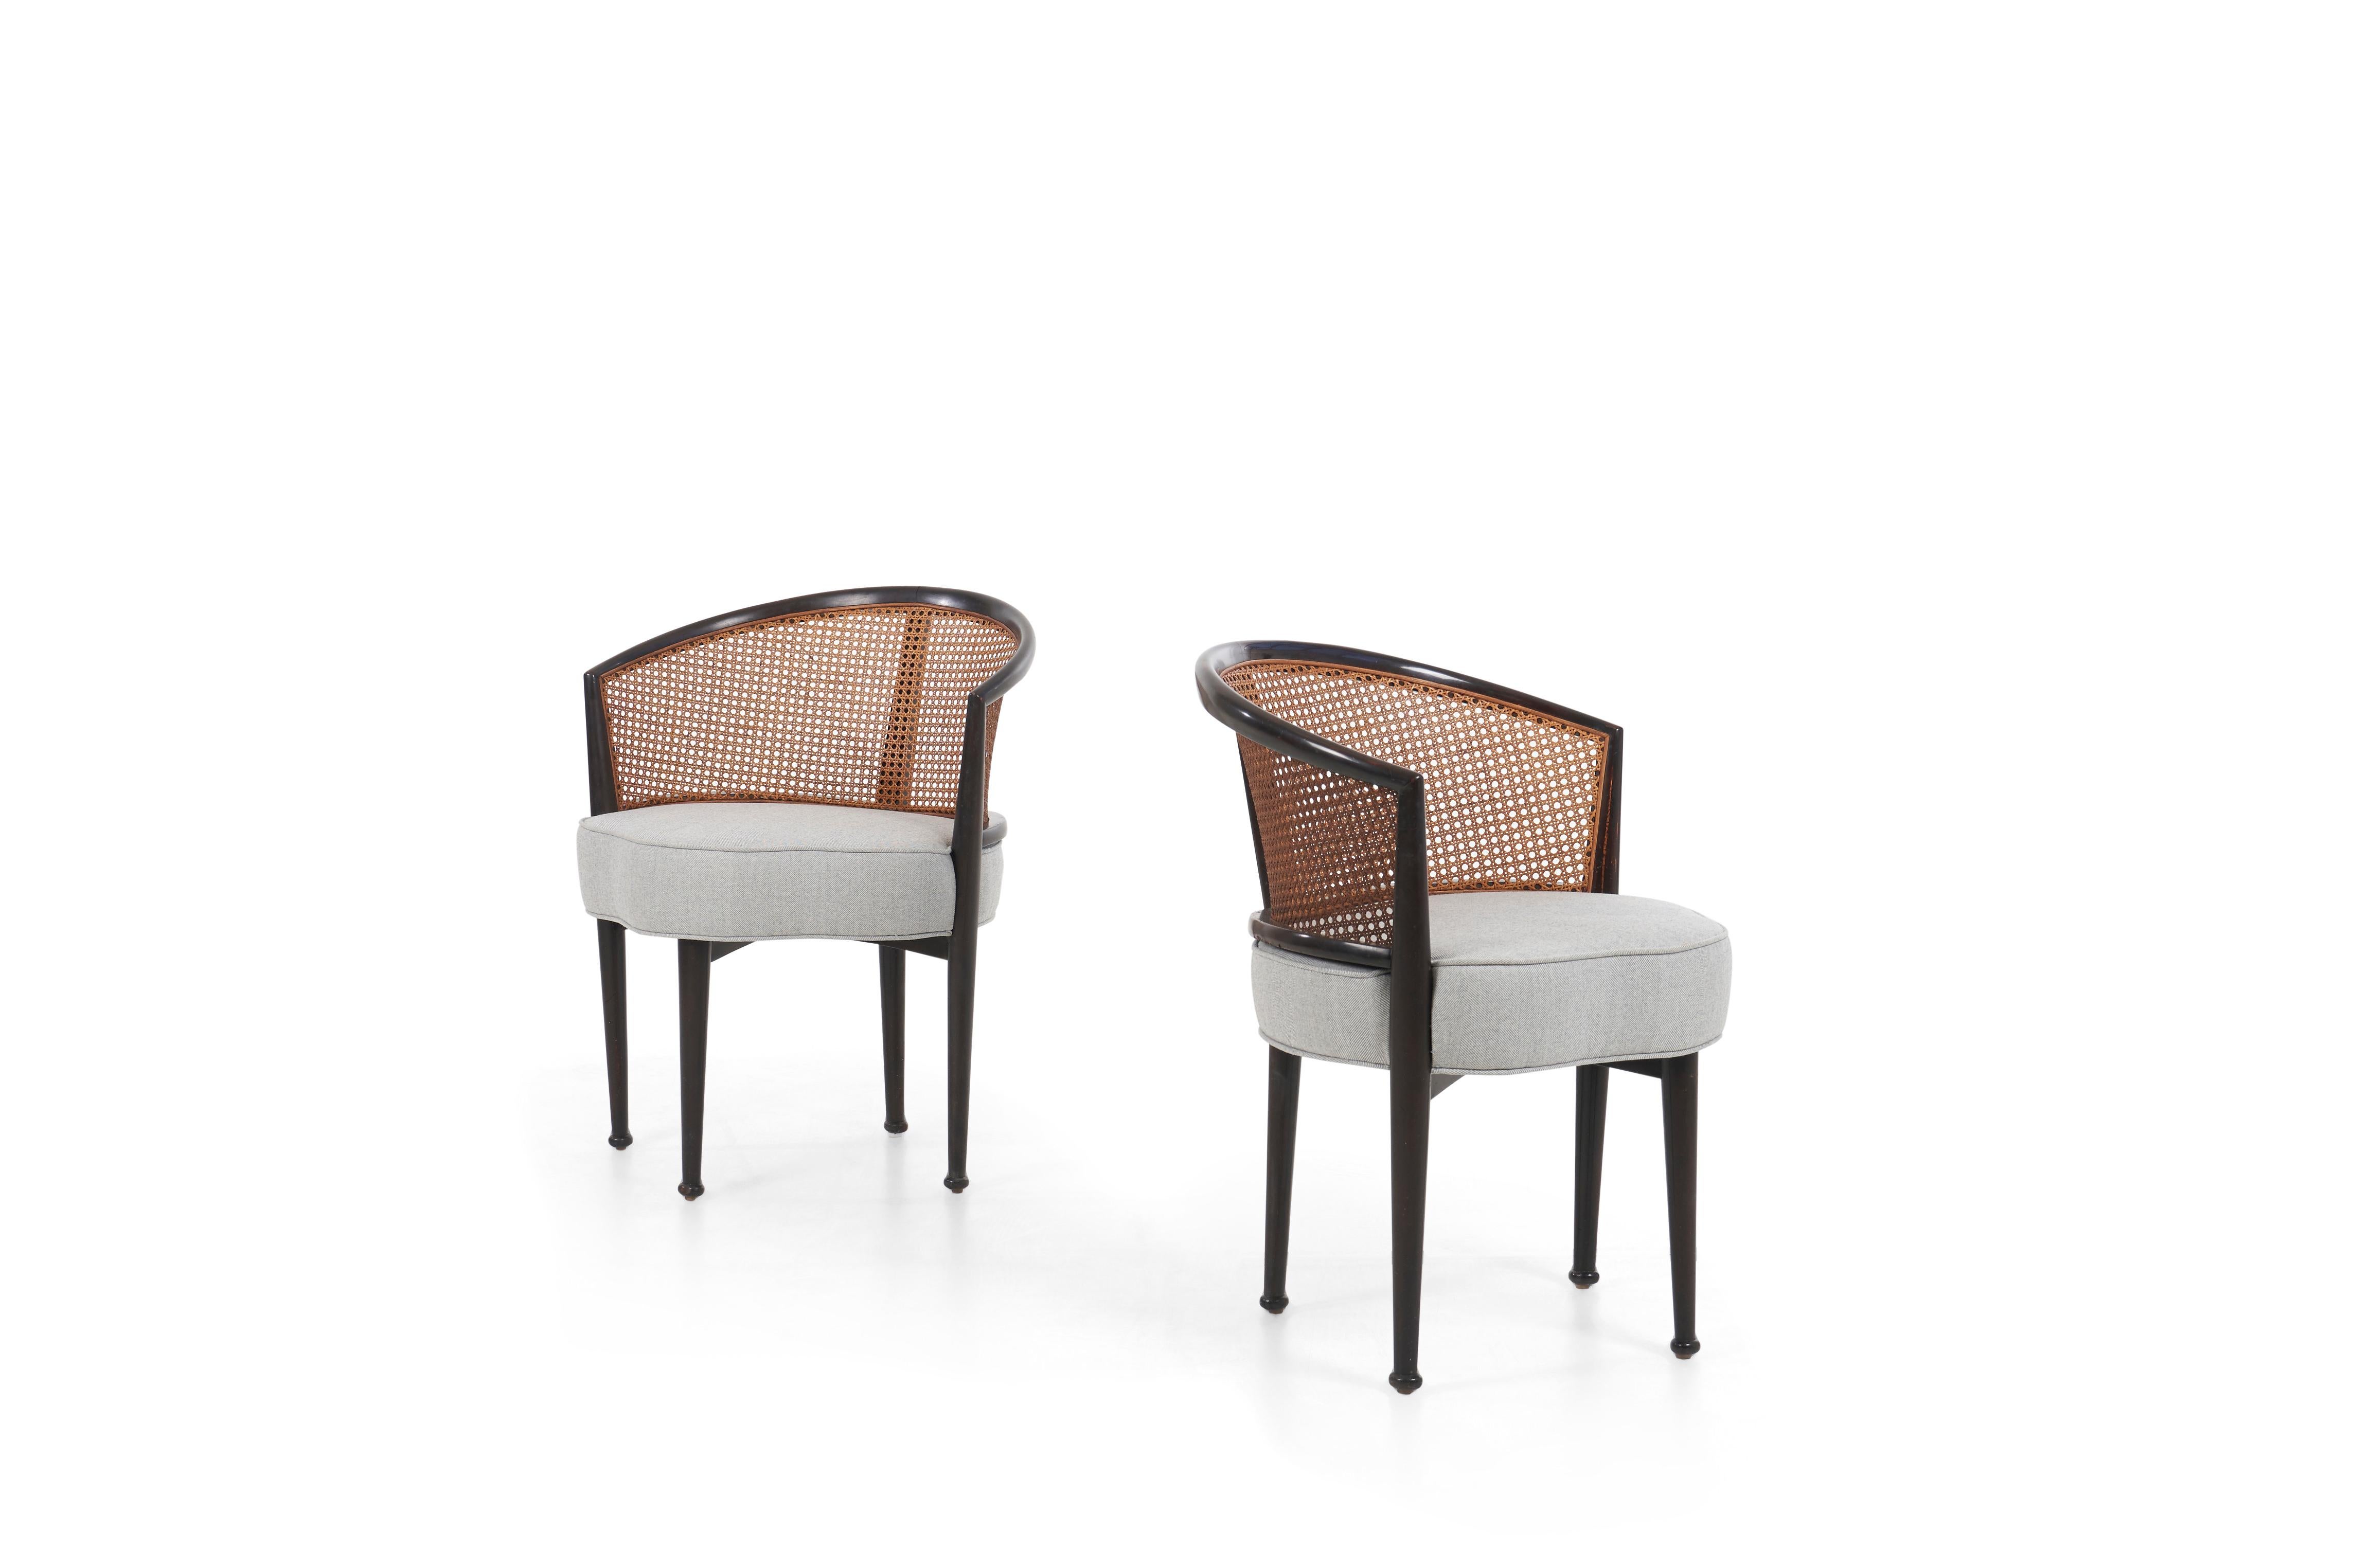 Wormley for Dunbar, Janus Line, curved back pull up chairs.
Espresso colored frames lacquered, solid legs with carved boot feet, canned backs and reupholstered seats with Great Plains herringbone cotton-poly blend, scalloped seat fronts.
[Plate on